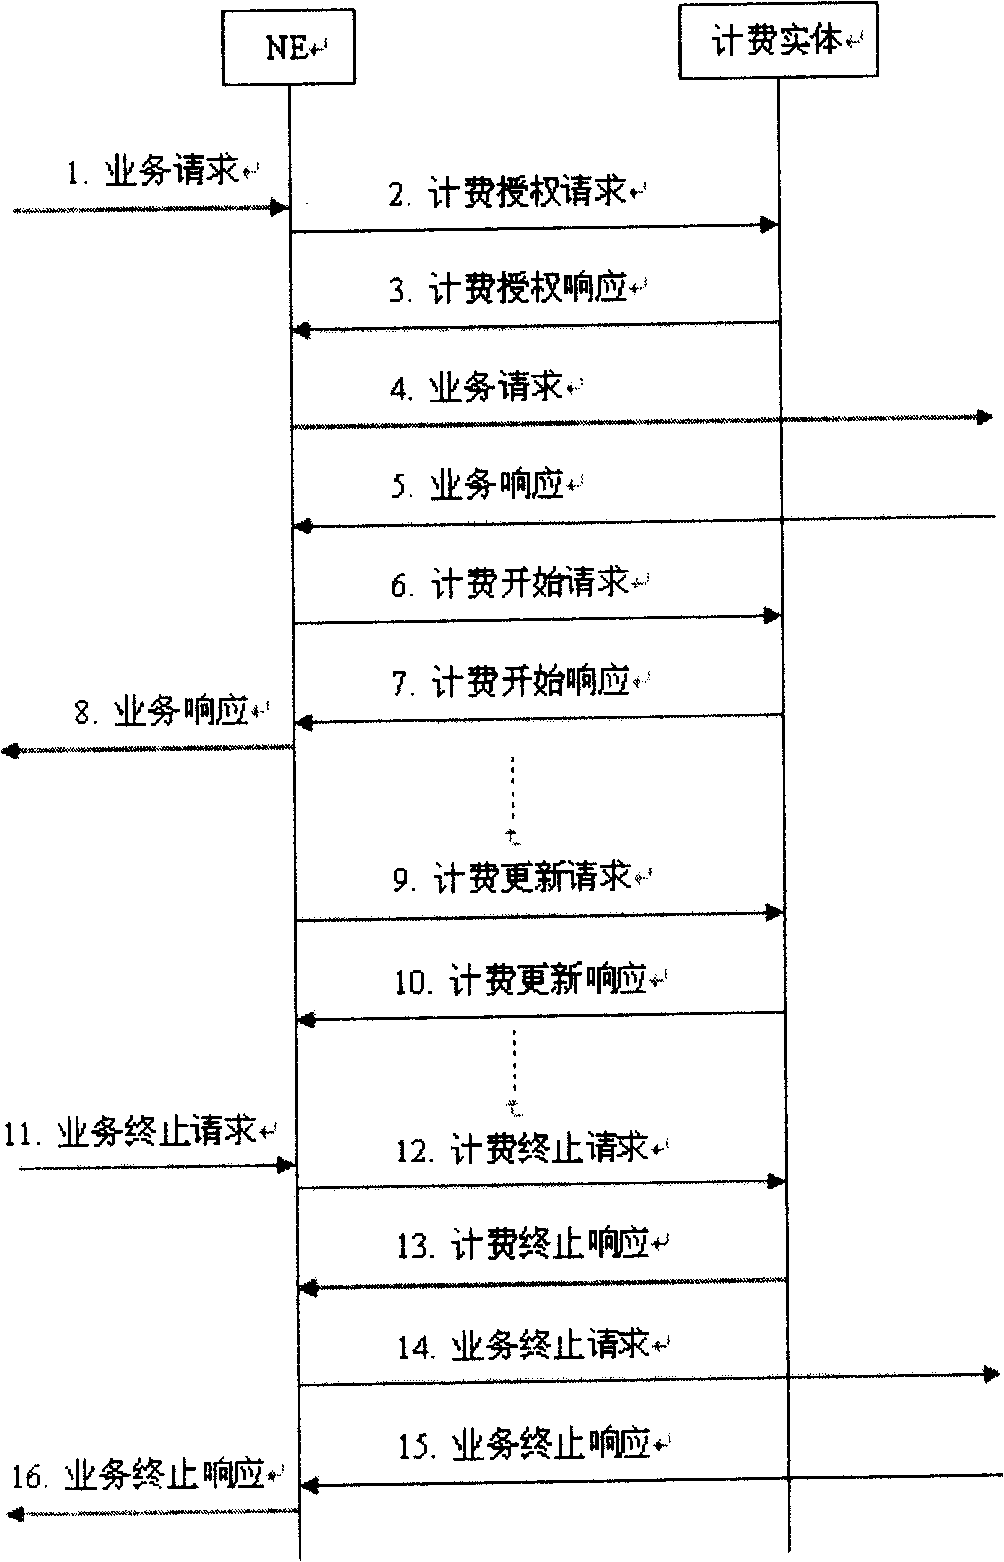 IMS network charging system and method